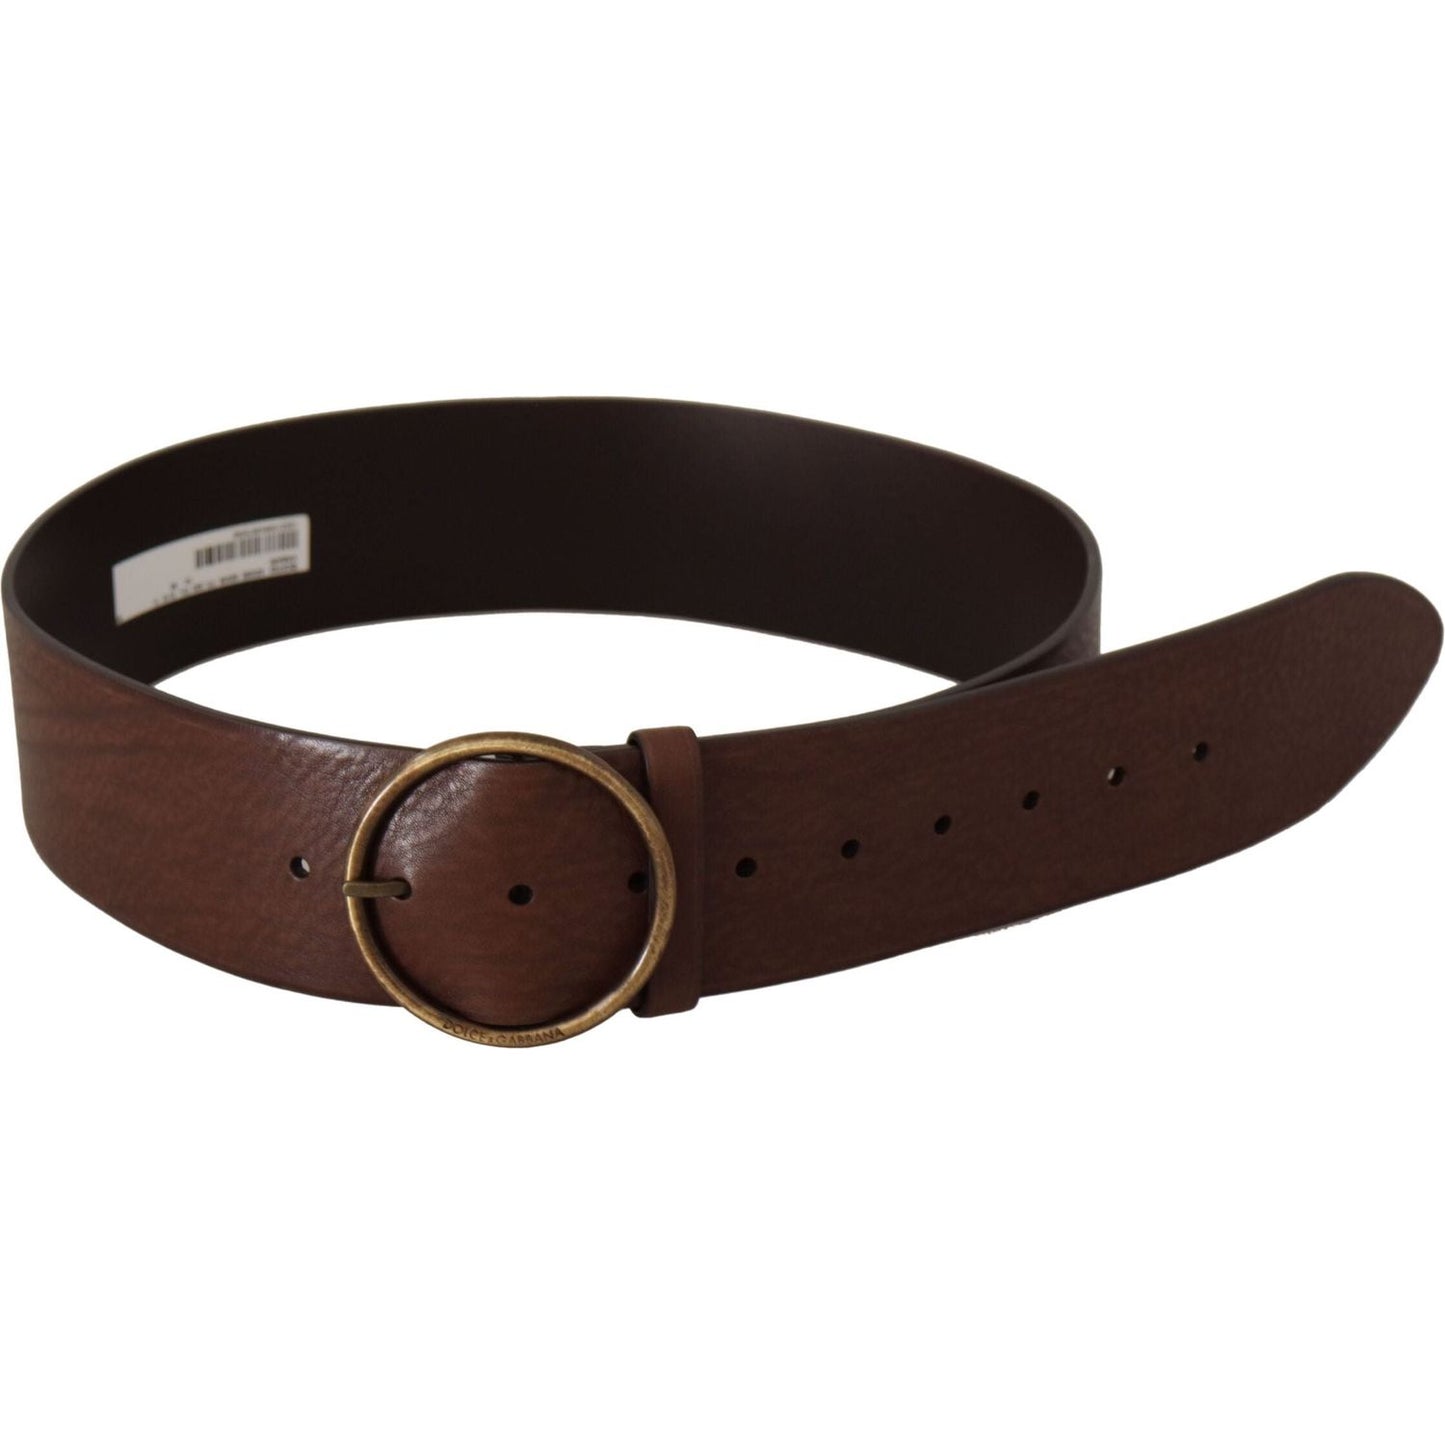 Dolce & Gabbana Elegant Brown Leather Belt with Engraved Buckle brown-leather-wide-waist-logo-metal-round-buckle-belt IMG_9744-1-scaled-c32243a5-3ce.jpg